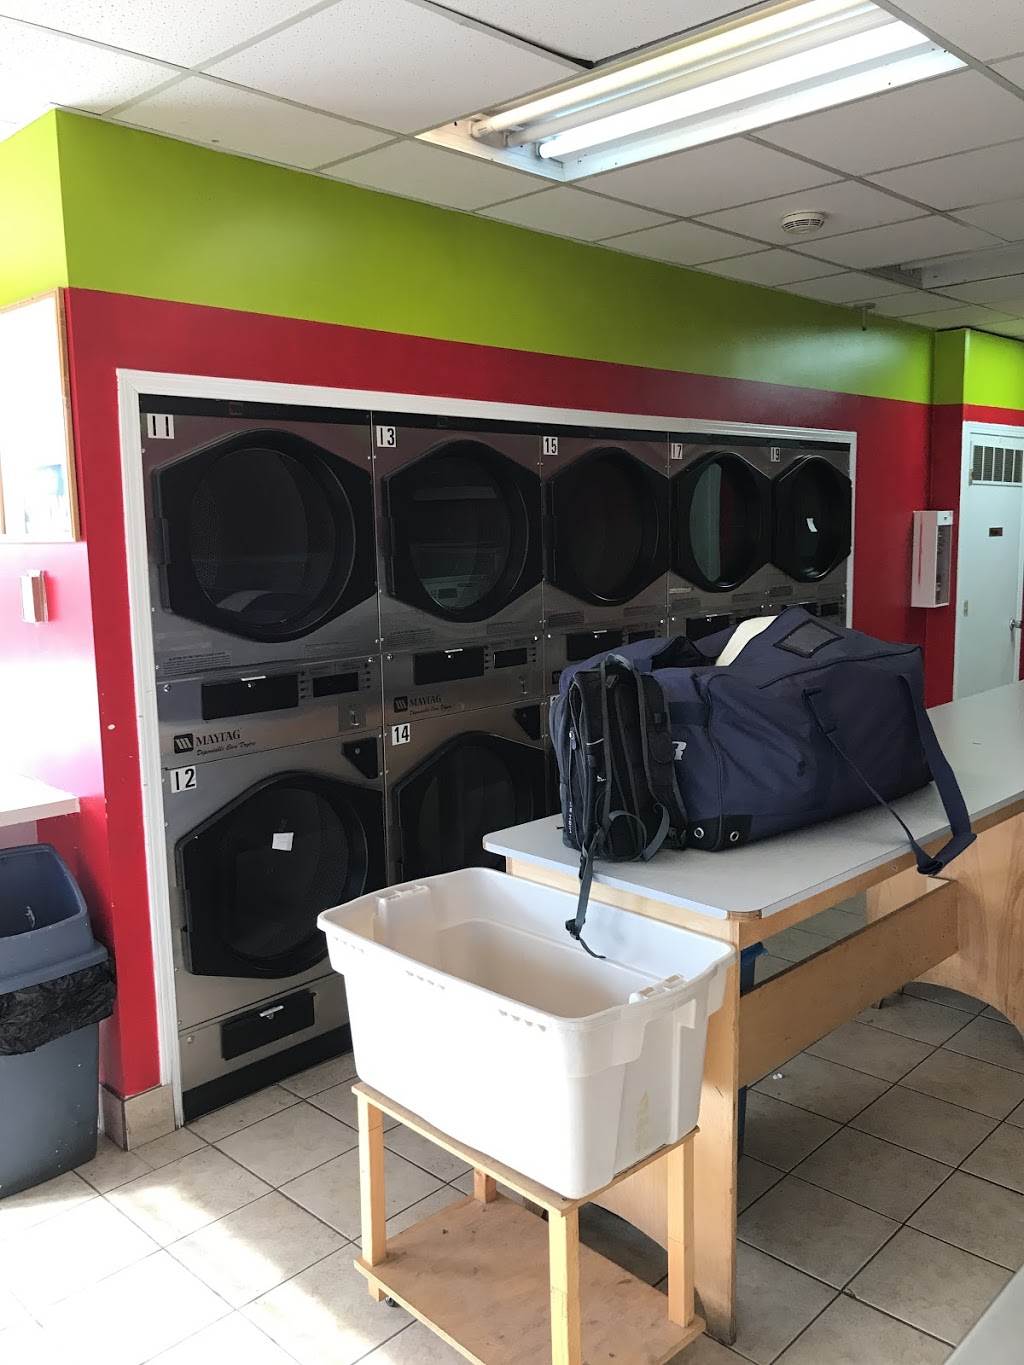 A & S Laundromat | laundry | 10610 105 St NW, Edmonton, AB T5H 2W9, Canada | 7804200555 OR +1 780-420-0555